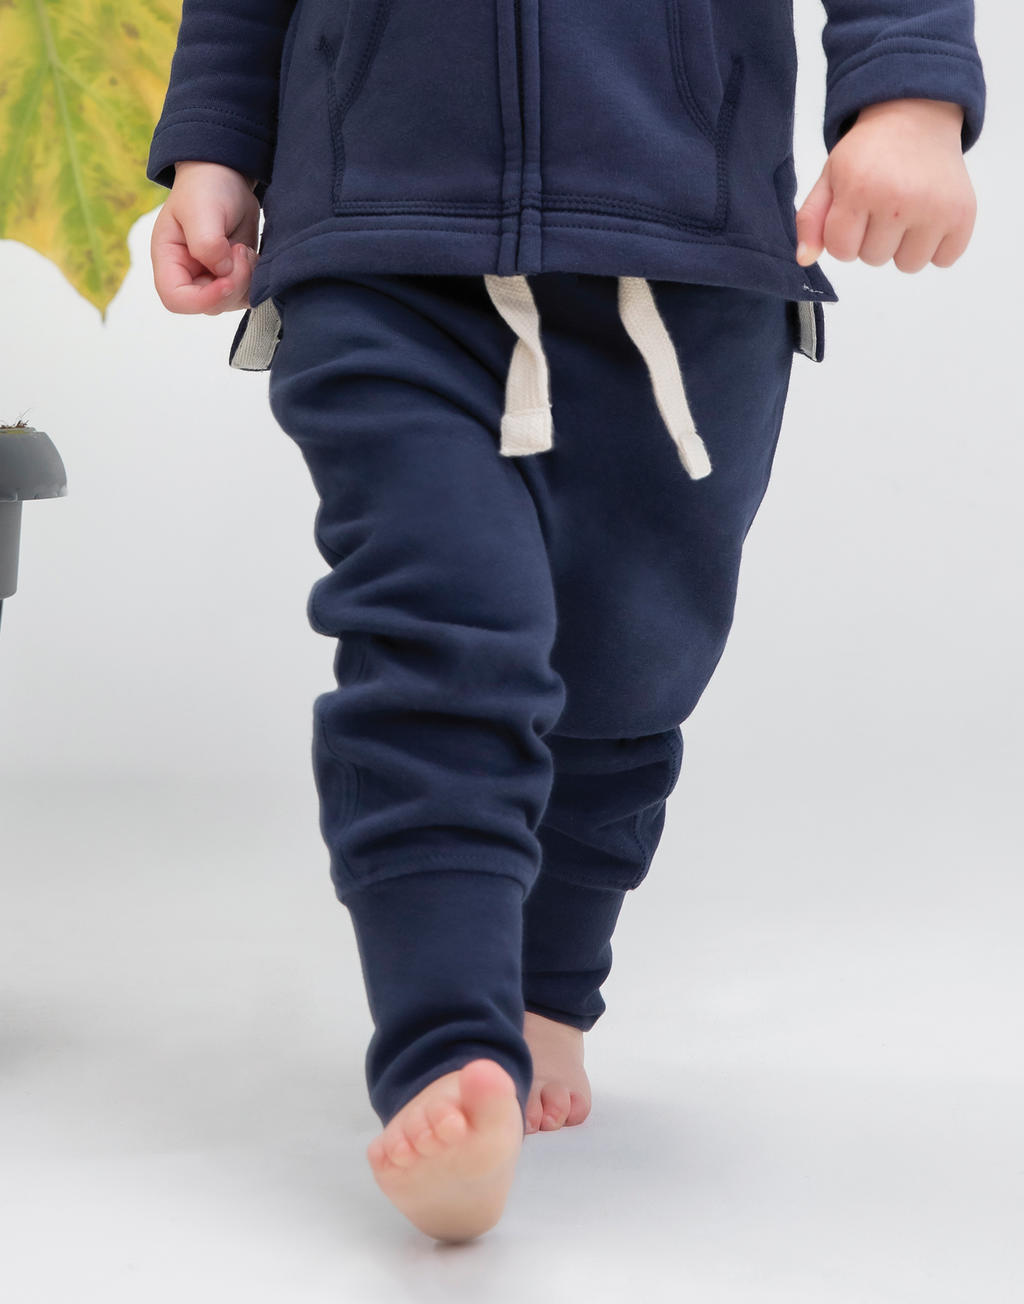  Baby Sweatpants in Farbe White